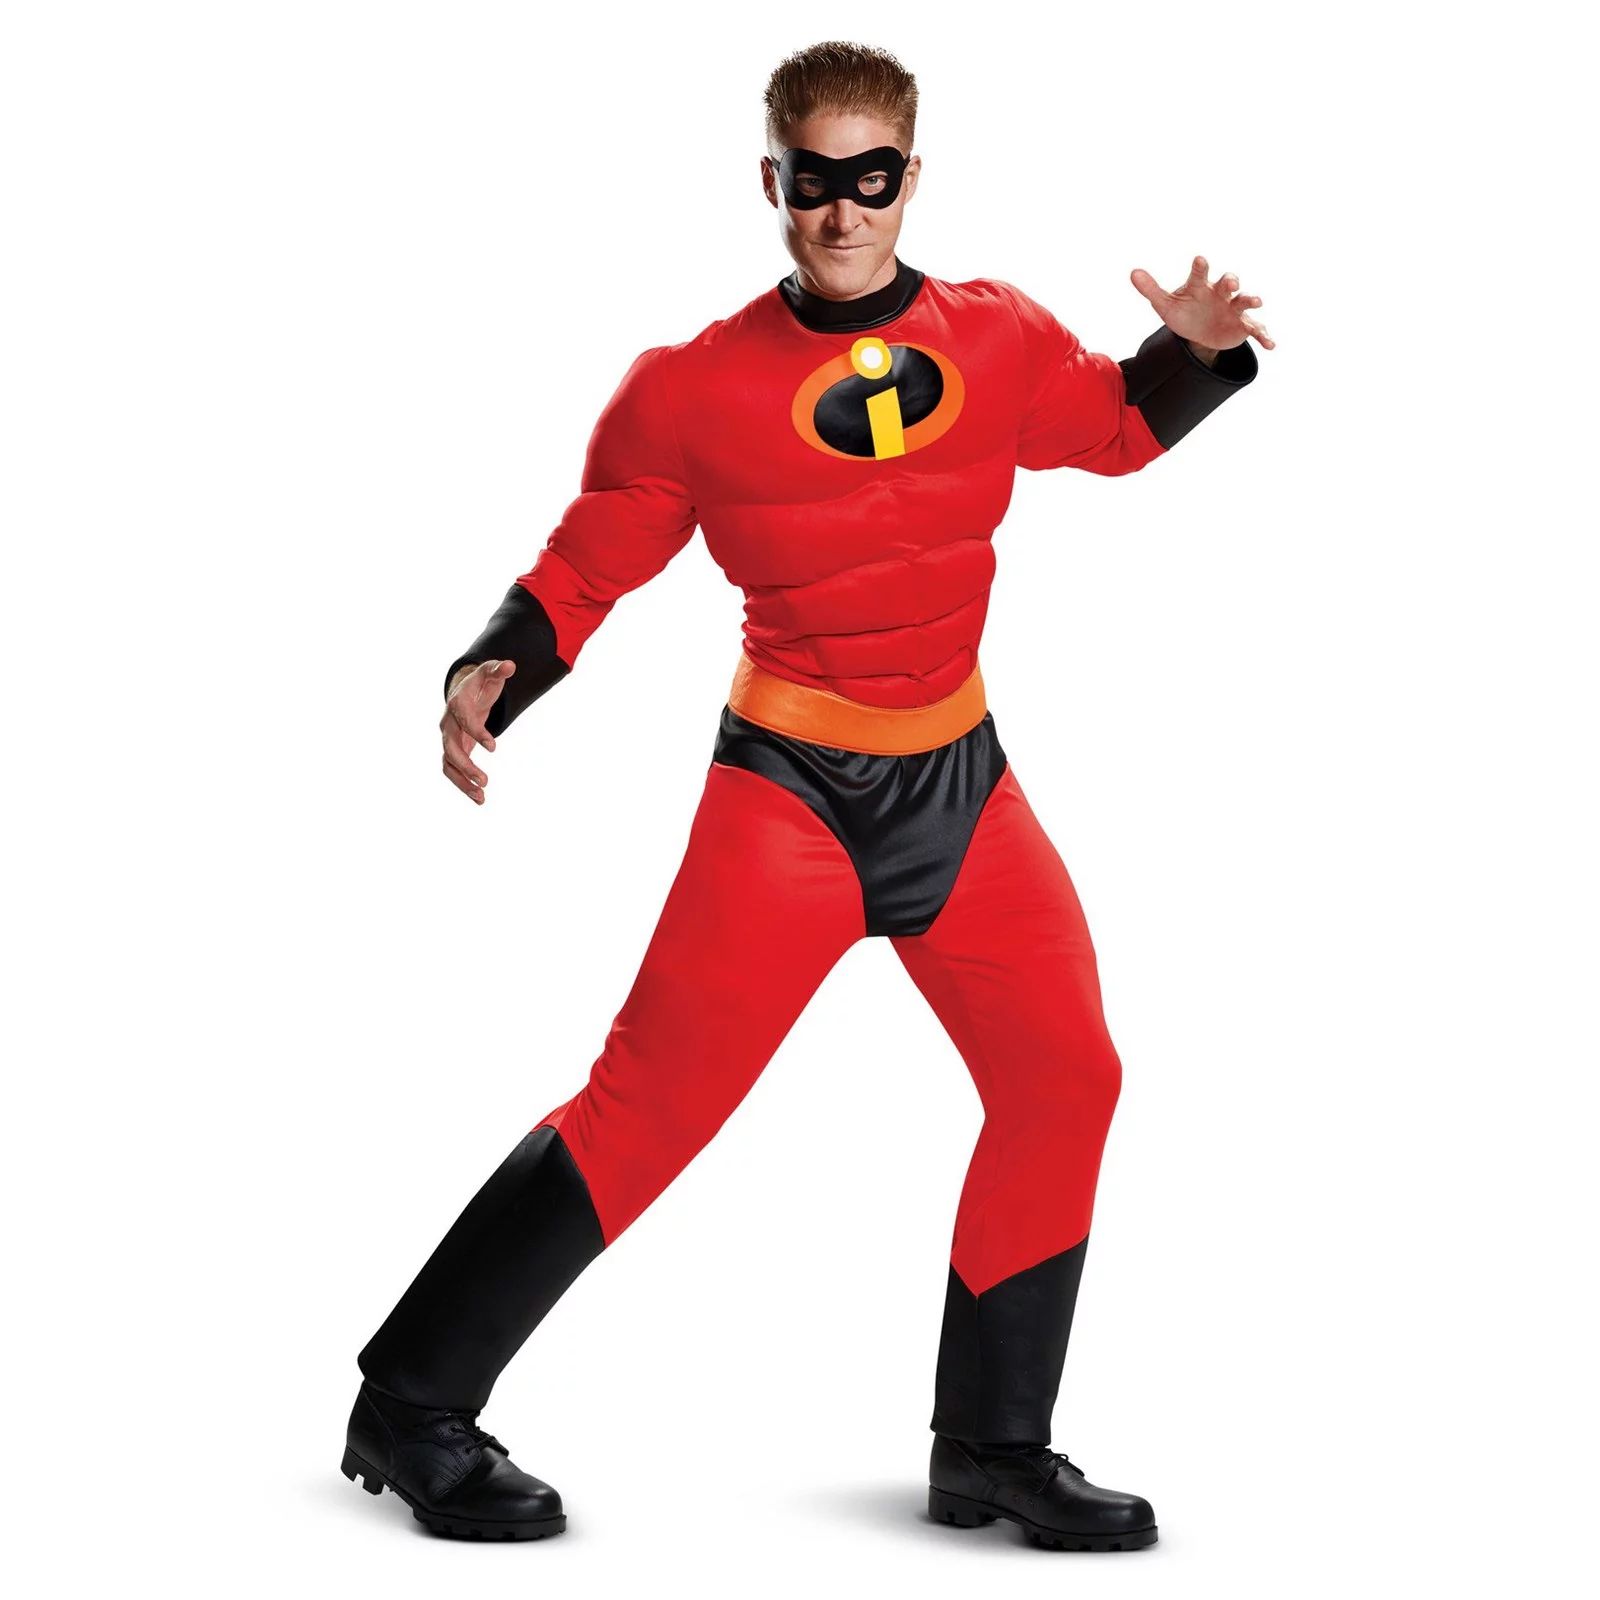 Men's Mr. Incredible Classic Muscle Costume - The Incredibles 2 | Walmart (US)